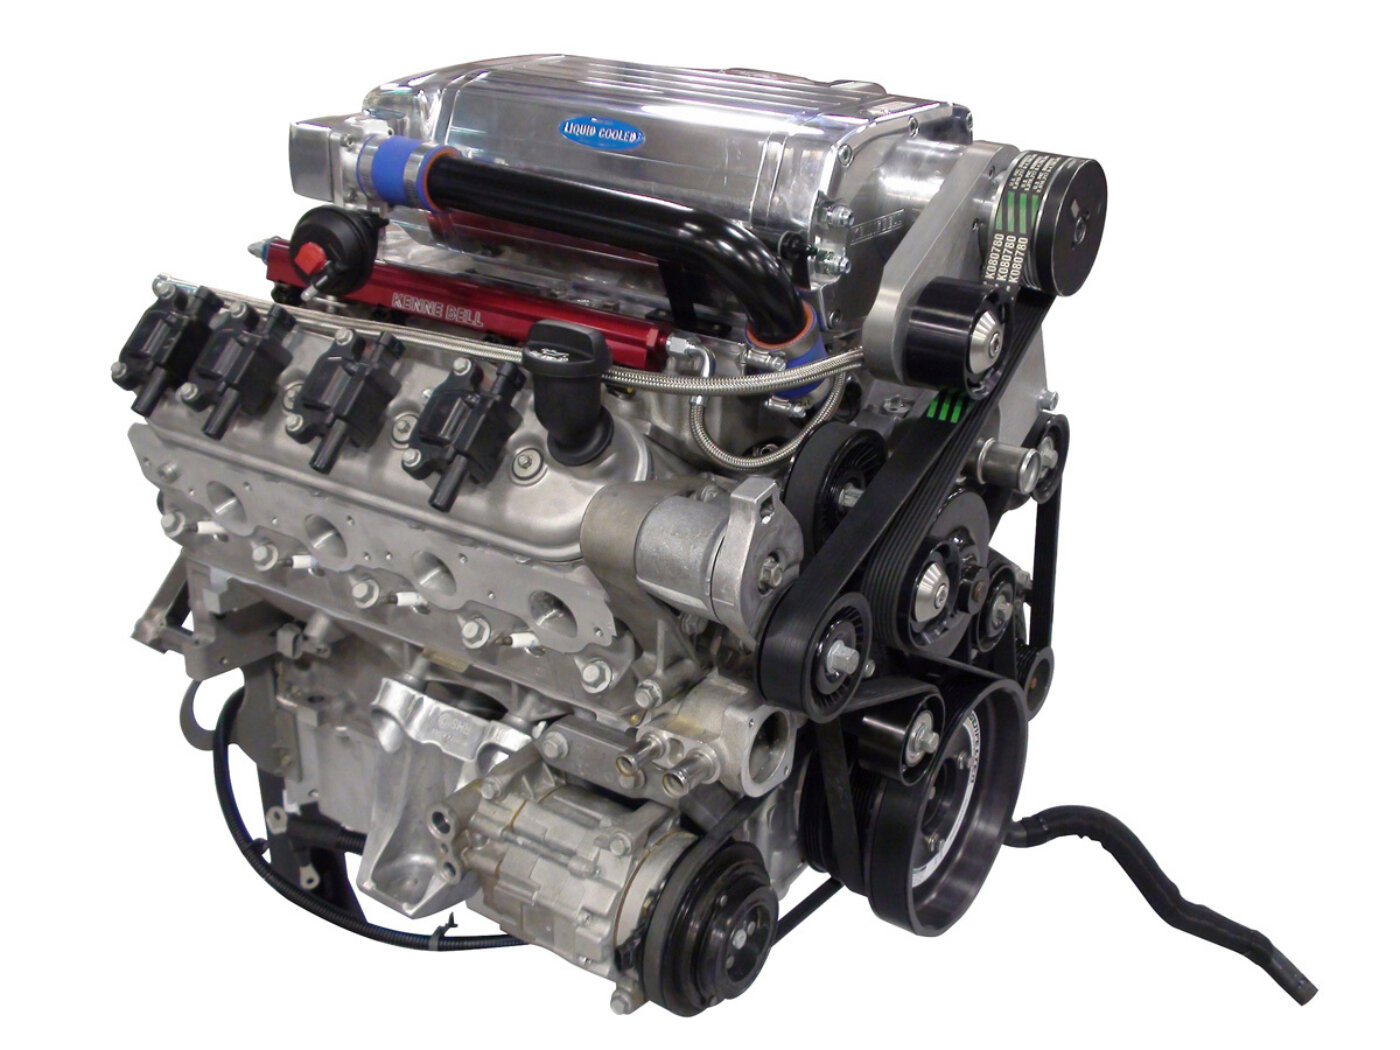 						Lingenfelter 900Hp Crate Engine 1
			